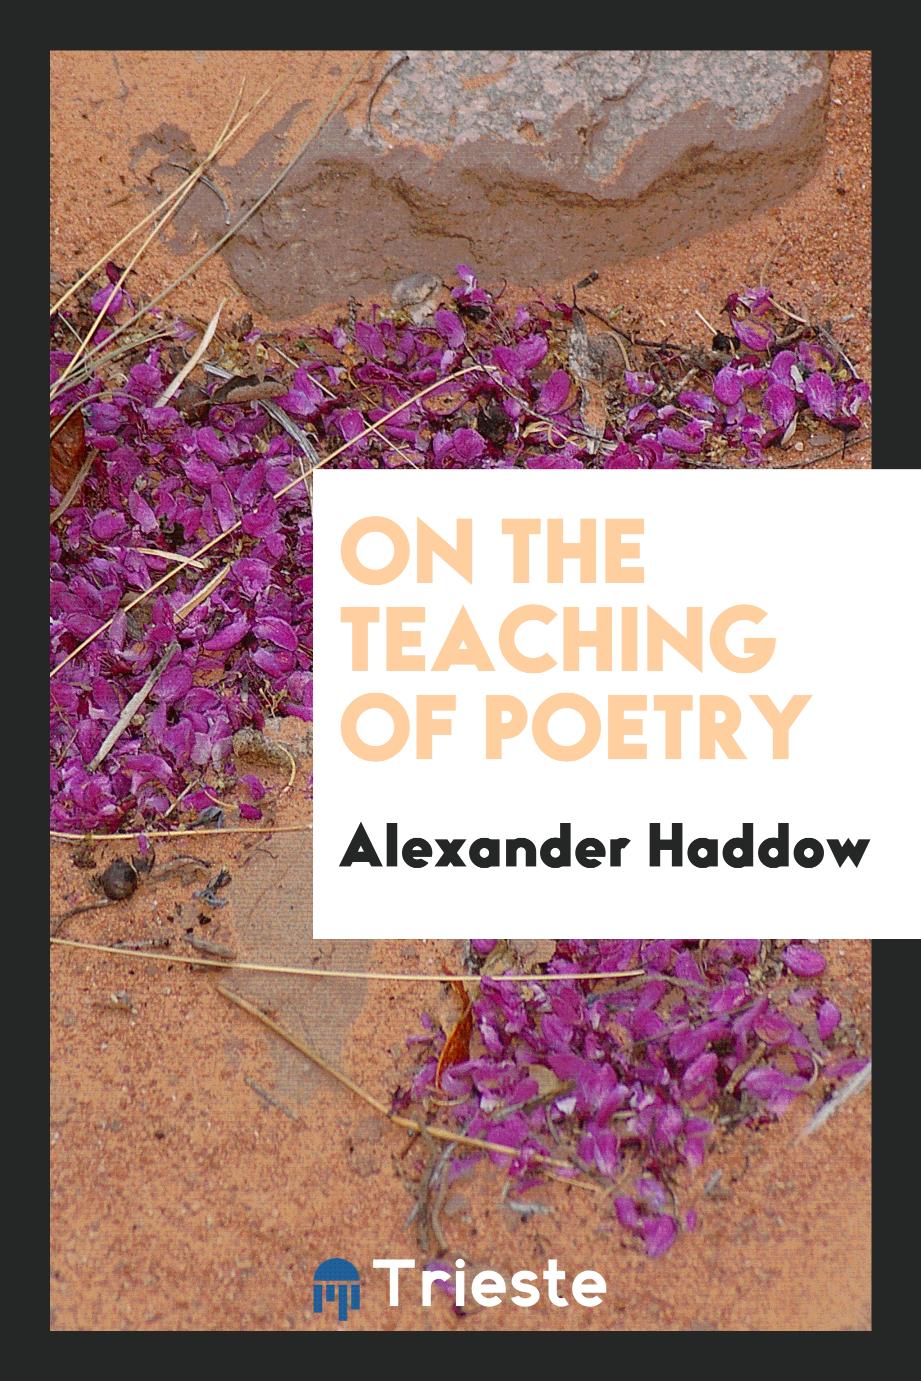 On the teaching of poetry